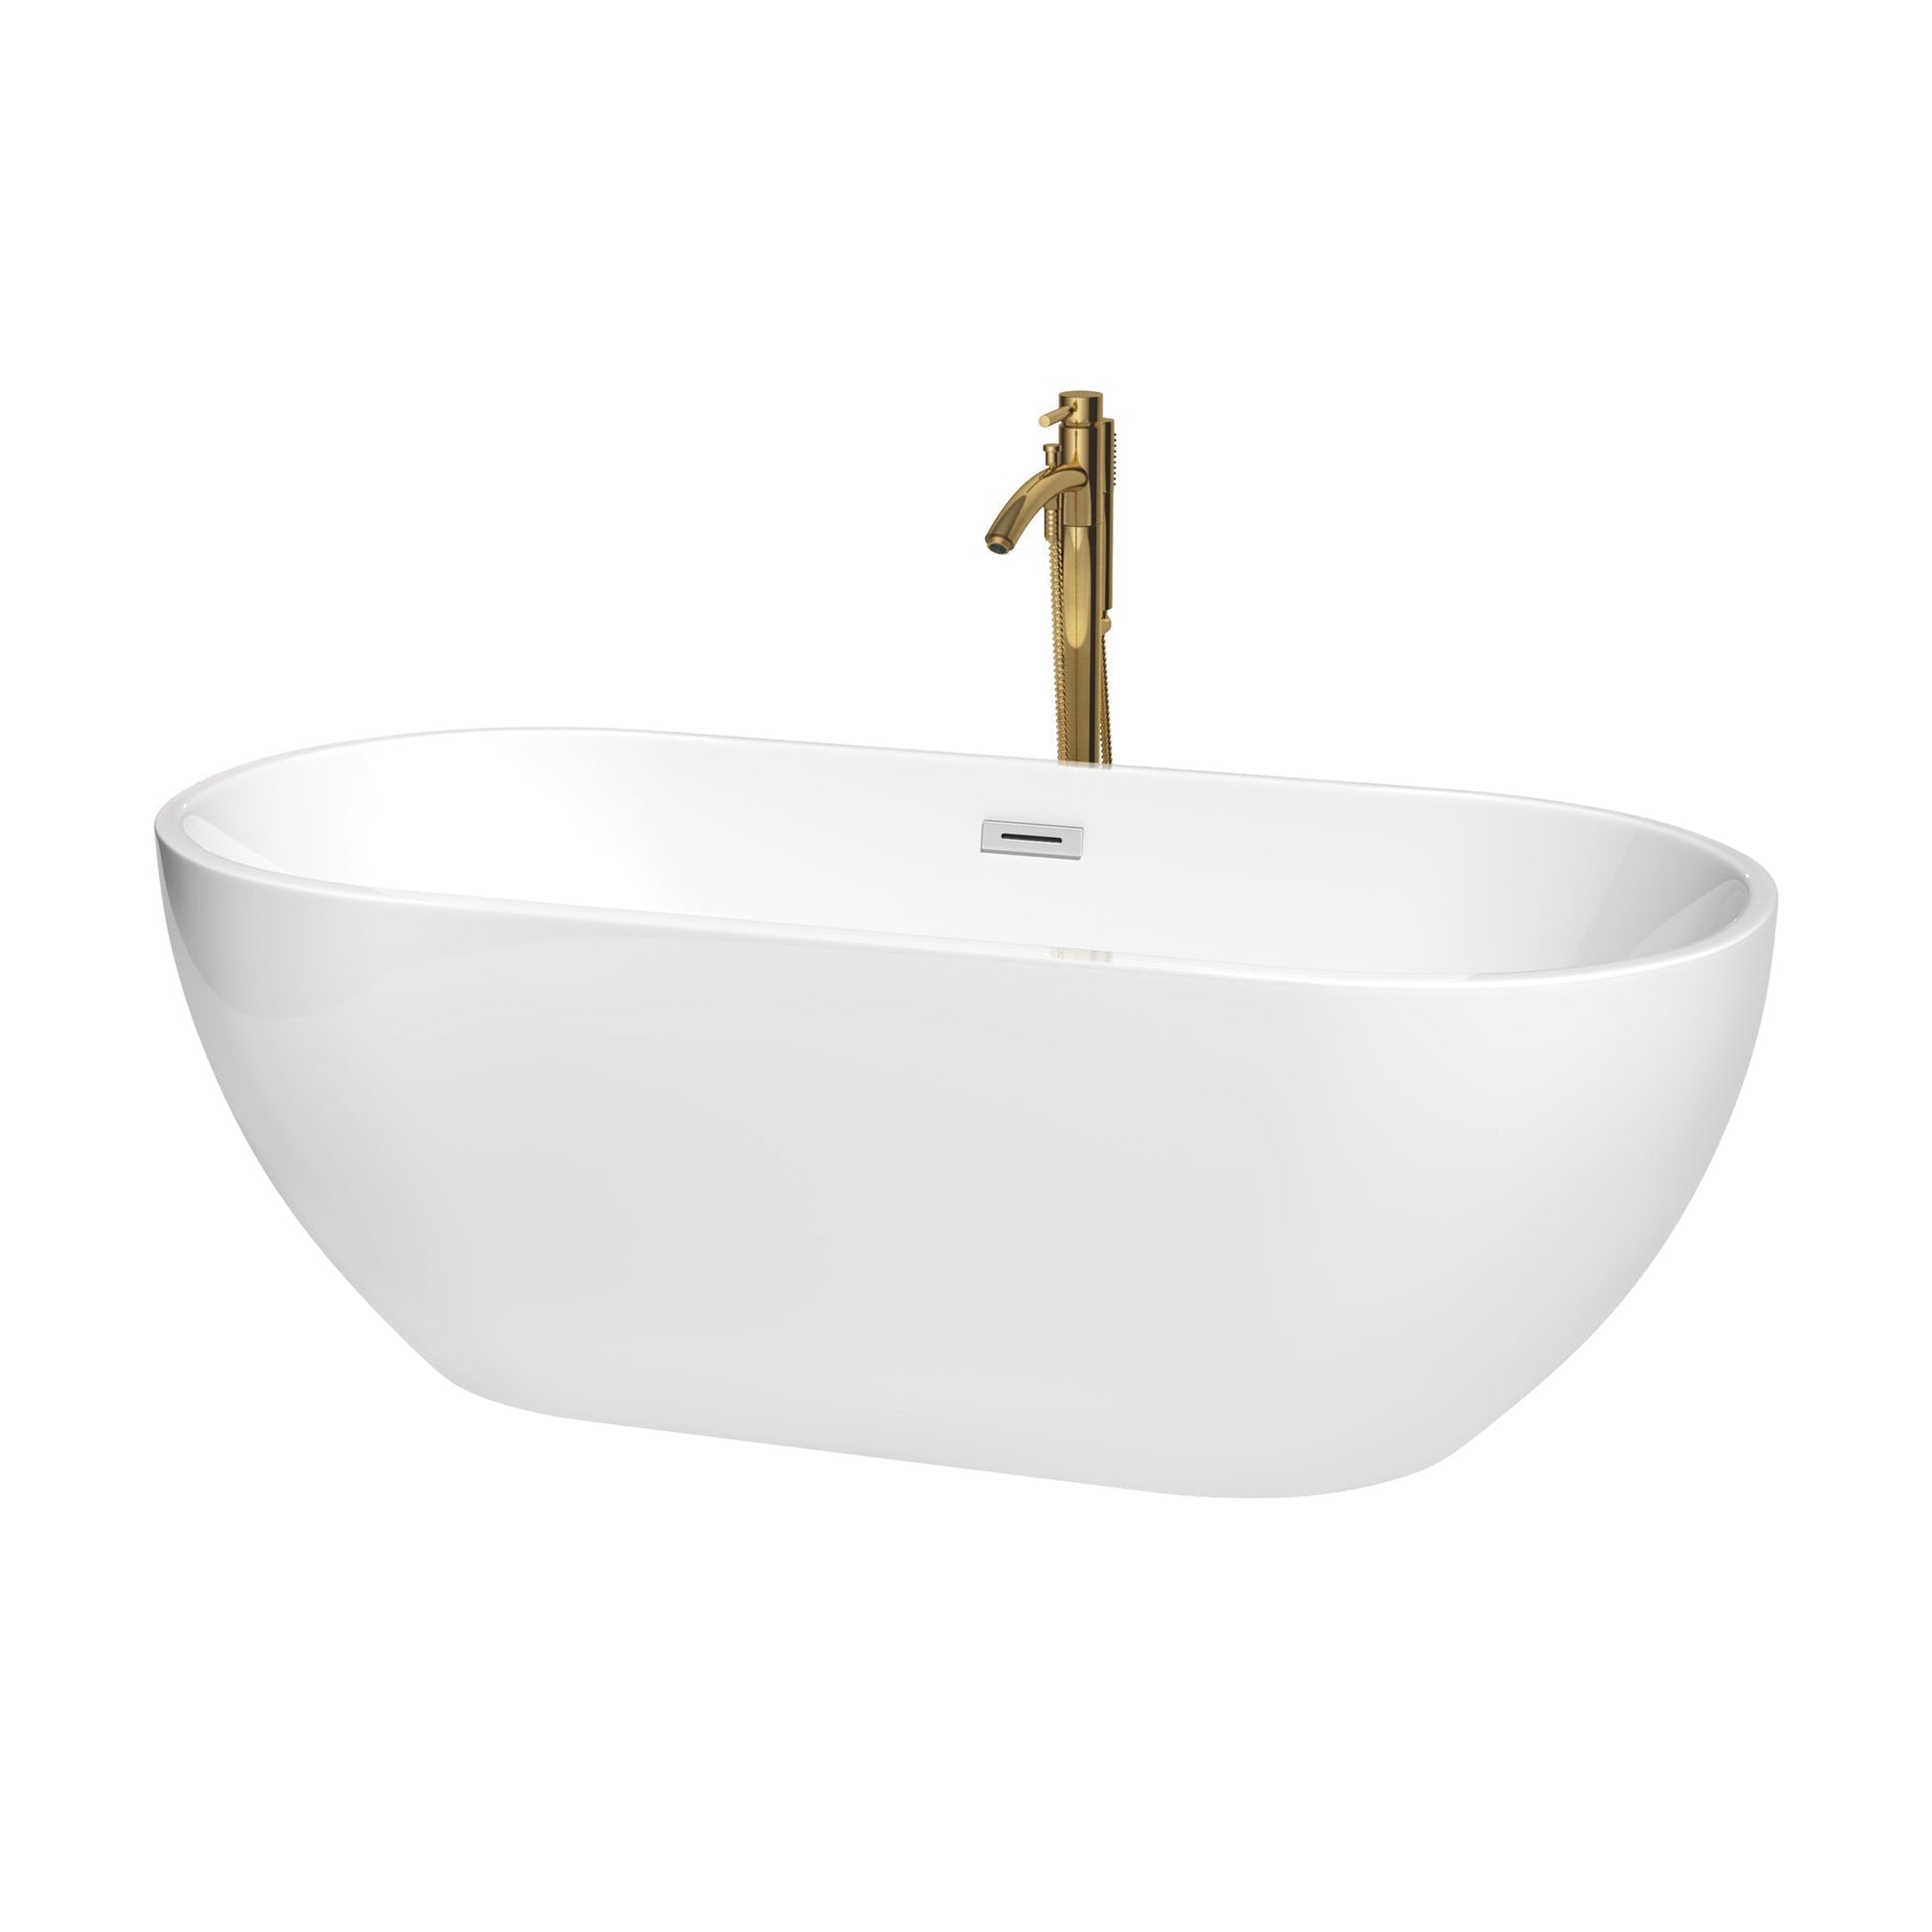 Wyndham Collection Brooklyn 67" Freestanding Bathtub in White With Polished Chrome Trim and Floor Mounted Faucet in Brushed Gold